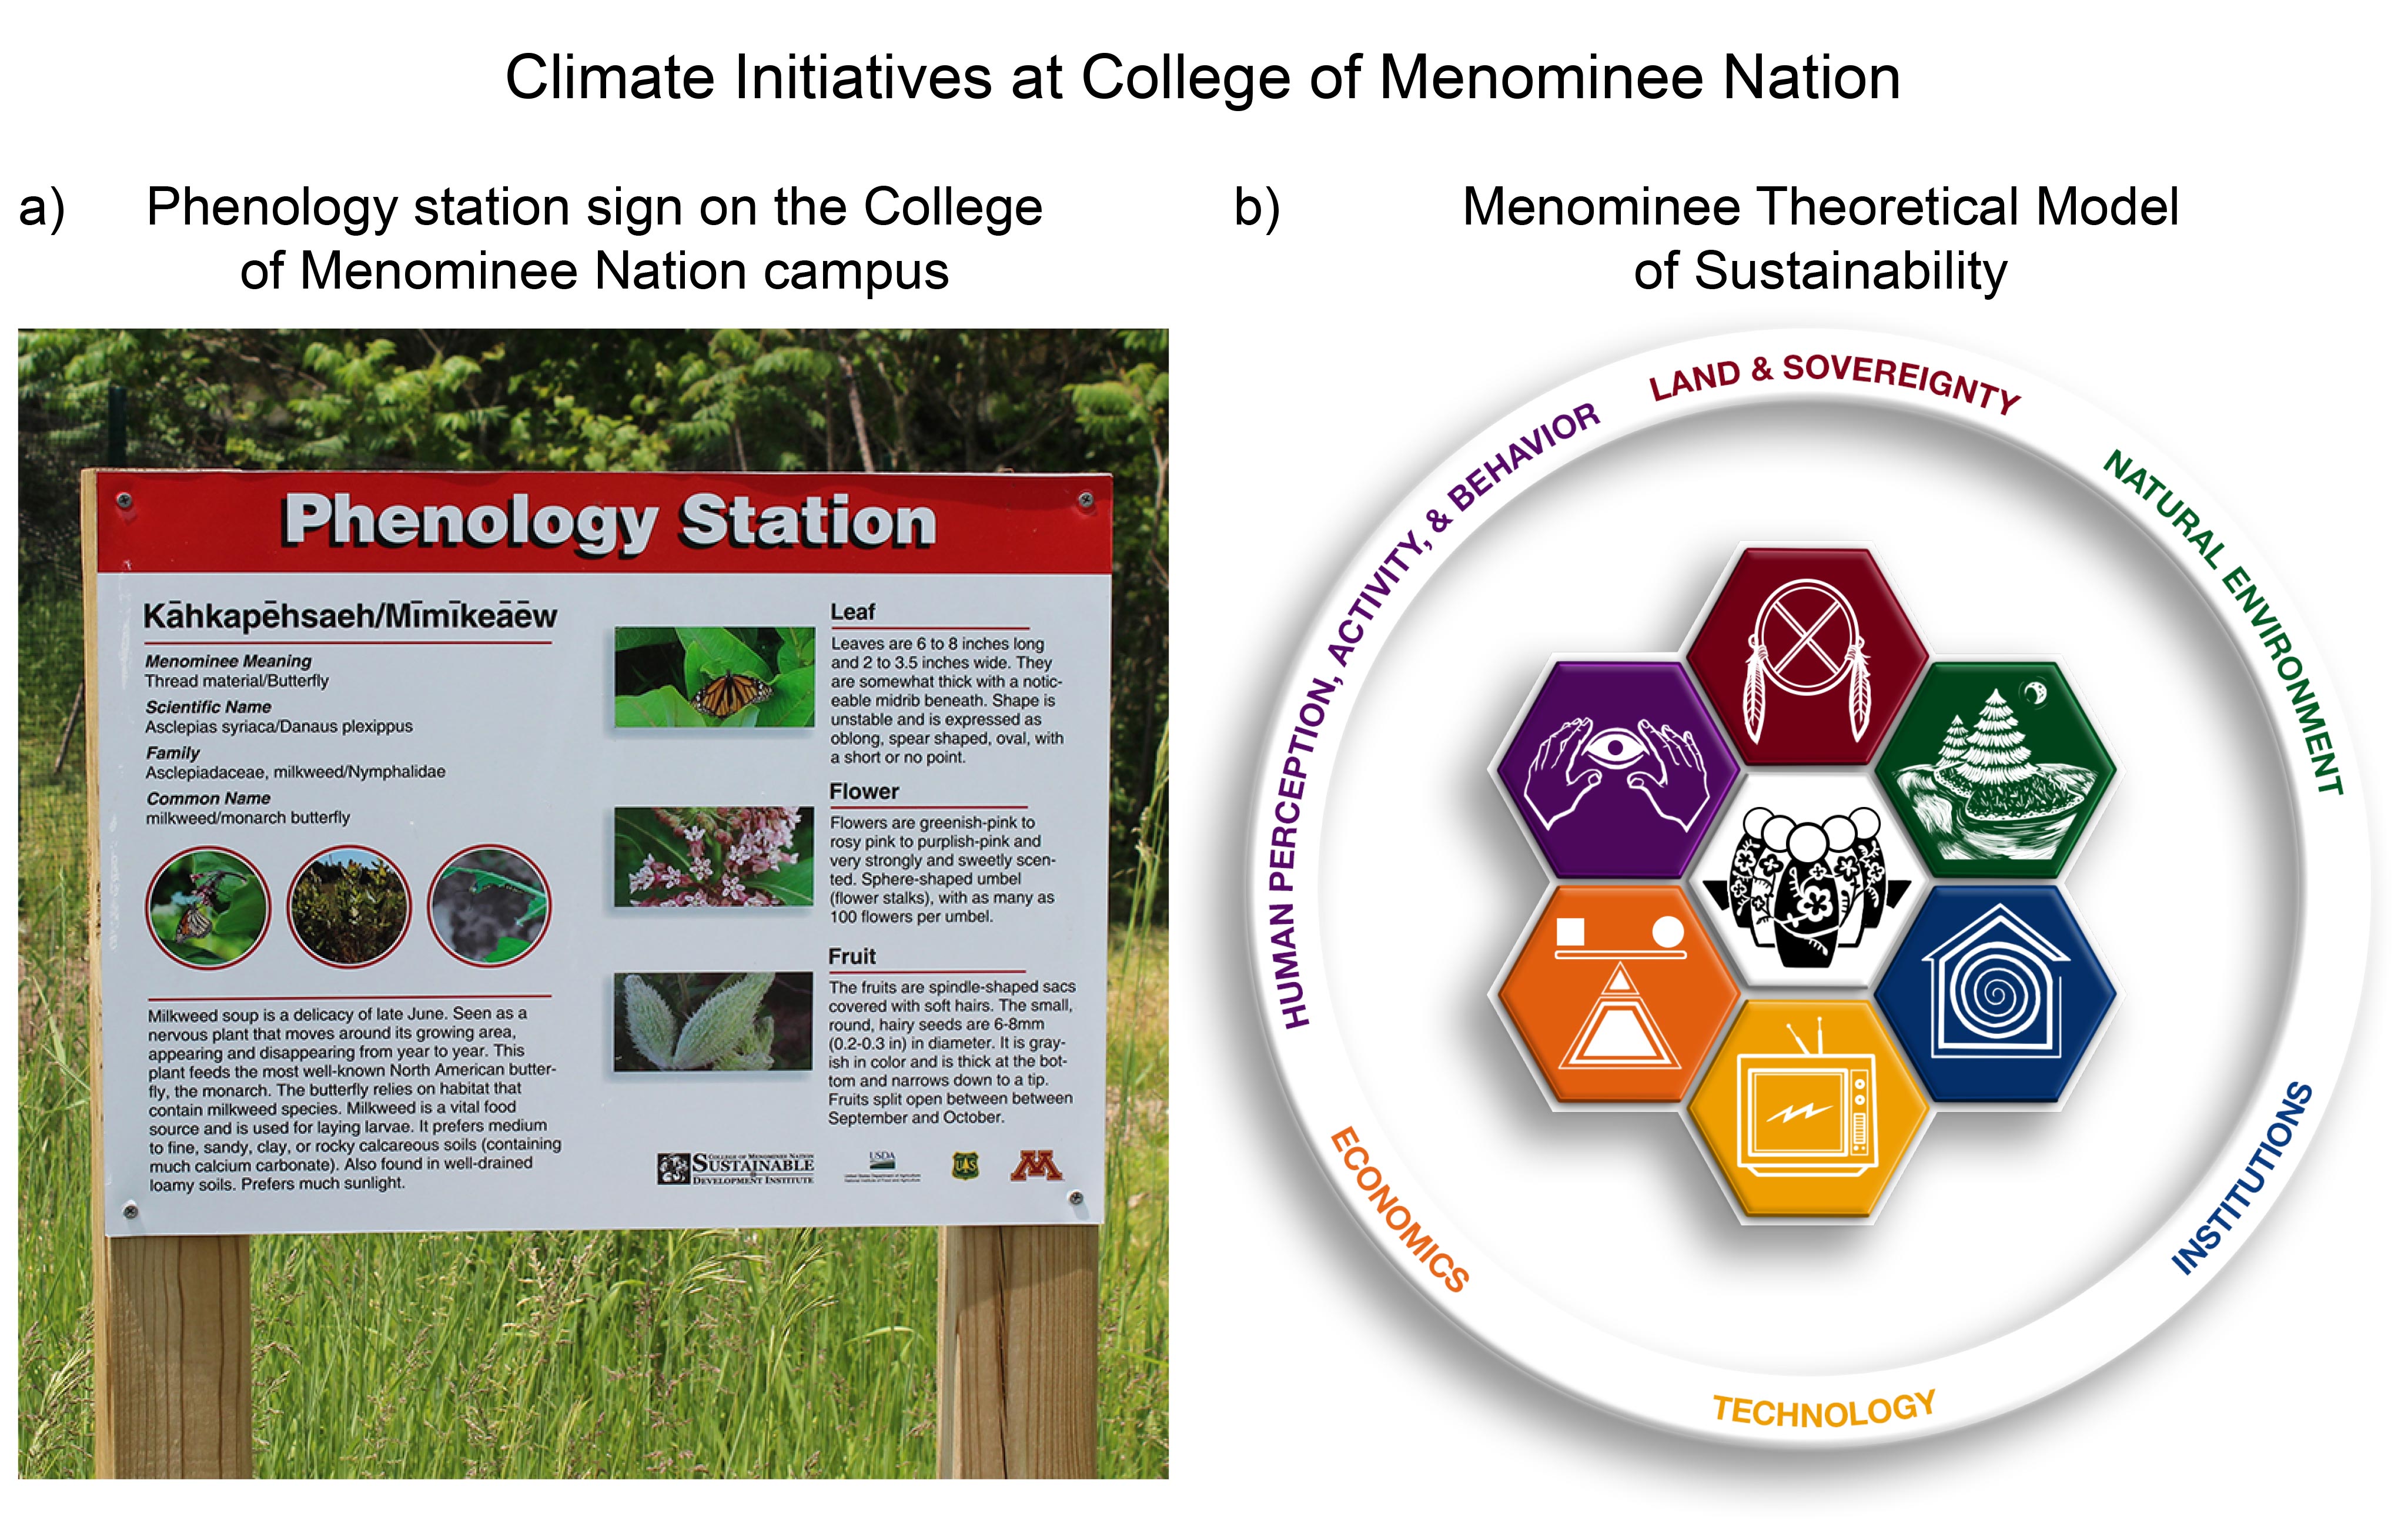 Climate initiatives at College of Menominee Nation